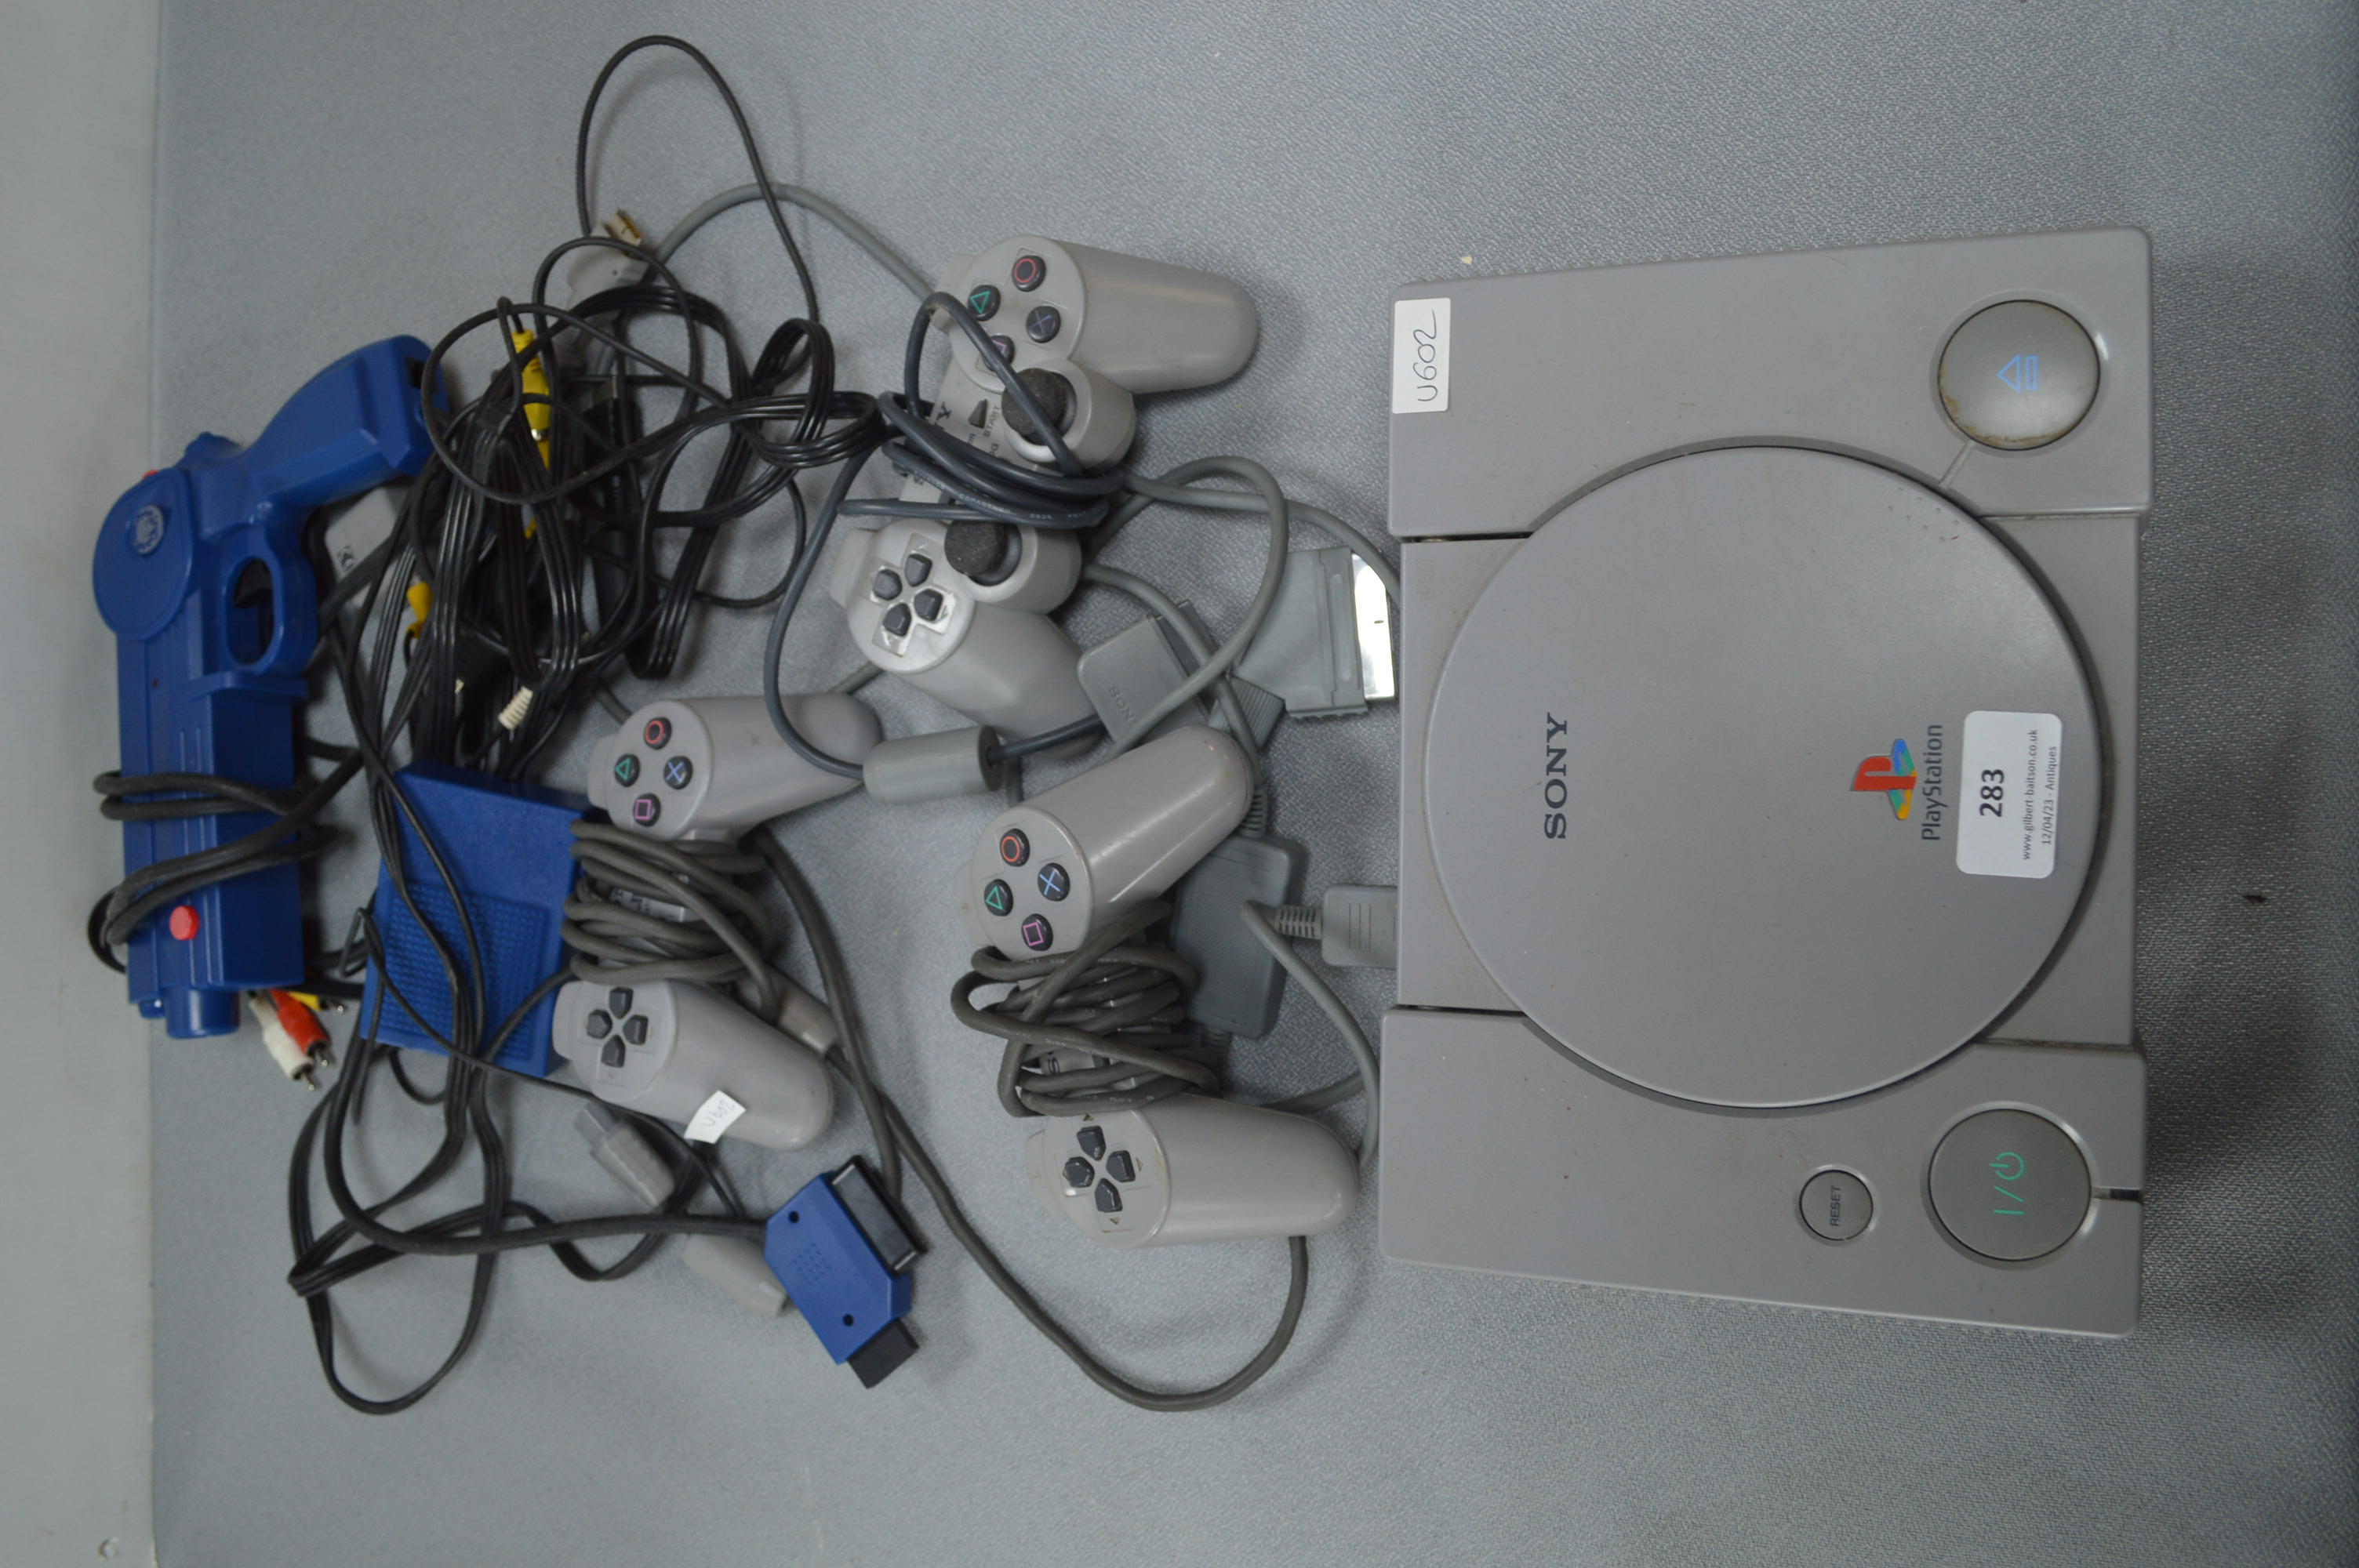 Sony PlayStation with Controllers, and Competition Pro Laser Gun